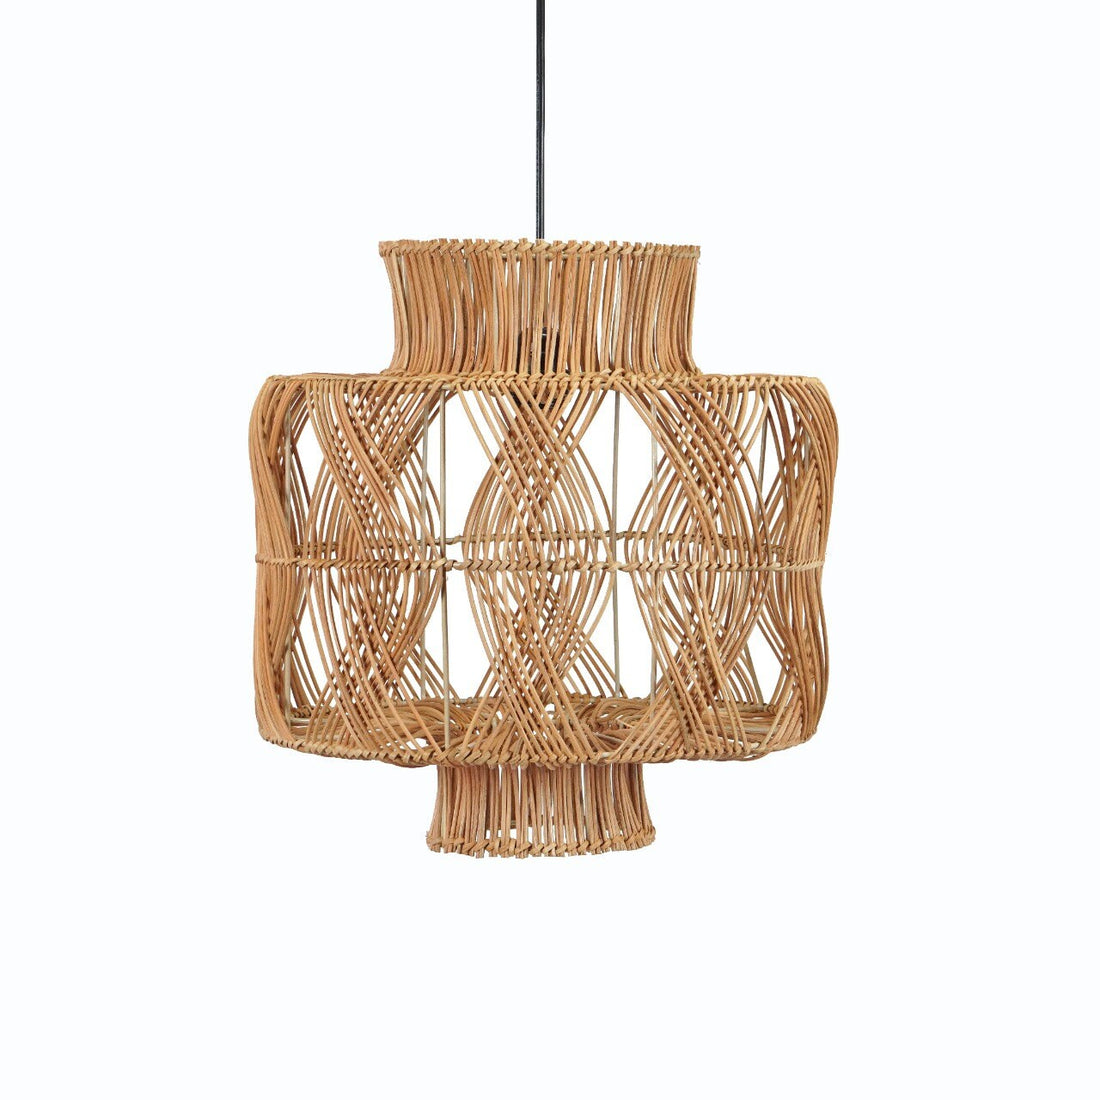 Rattan Lantern Lampshade Handcrafted, Sustainable Eco Friendly Lighting, Pendant Light, Chandelier, Lampshade